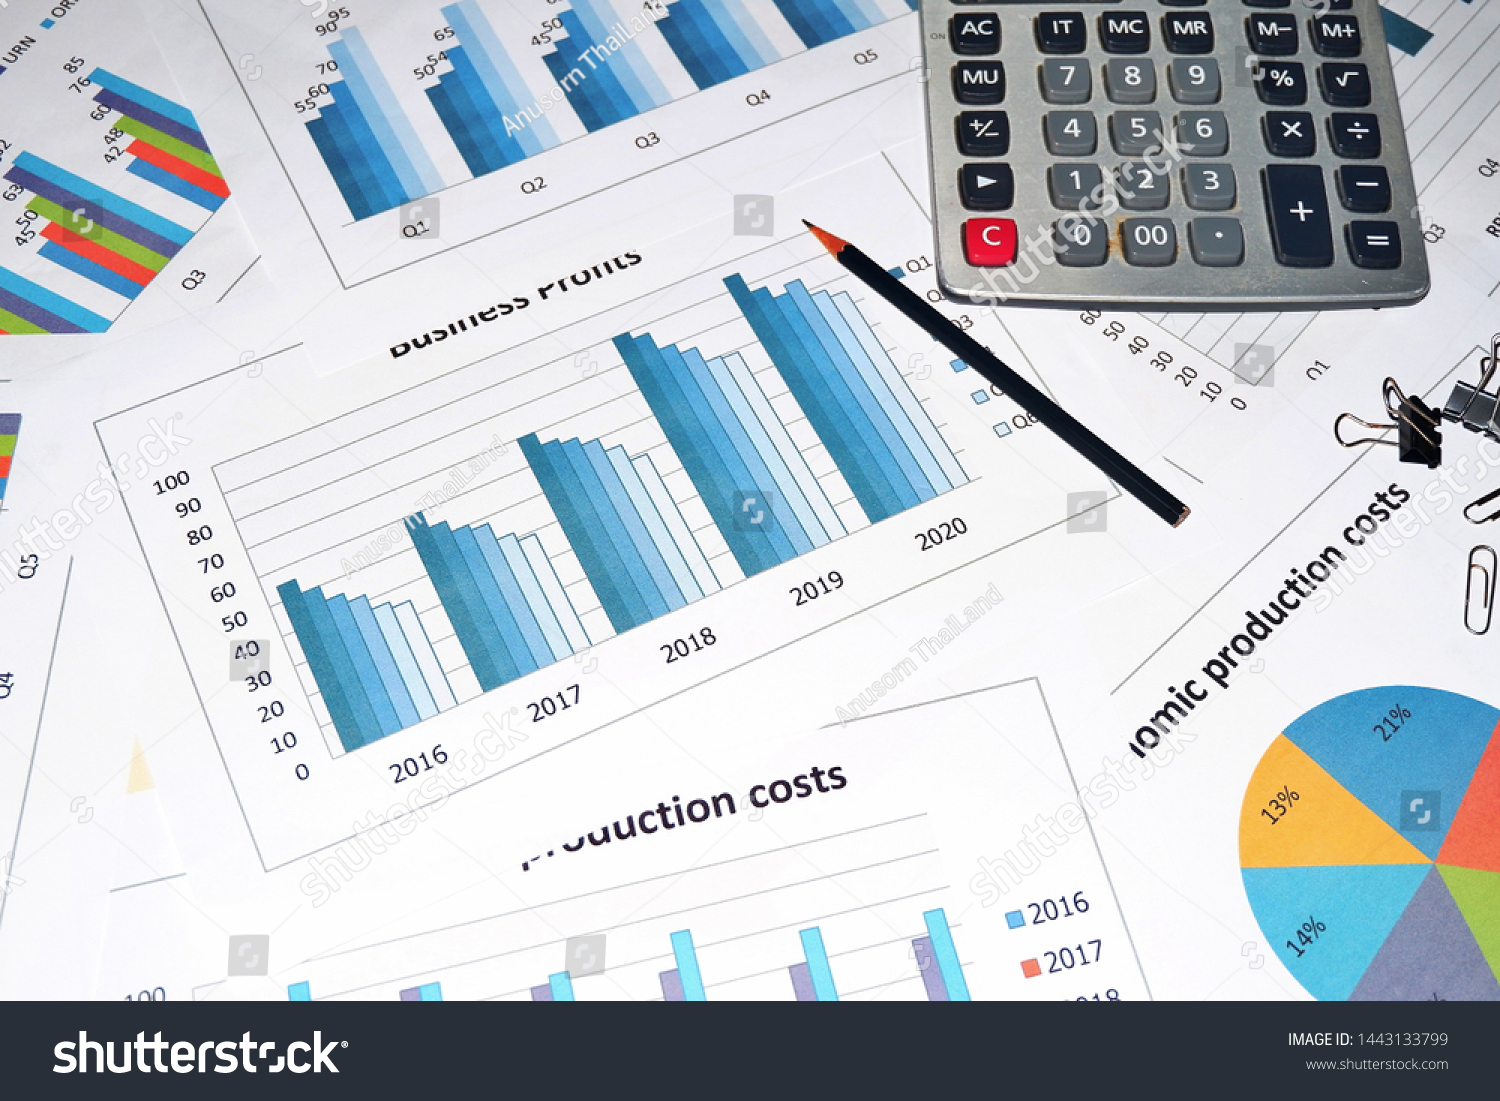 Business work, document data, graphs, graphs, marketing reports, research, development and planning for management, strategy analysis, financial accounting Business concepts in the future world #1443133799